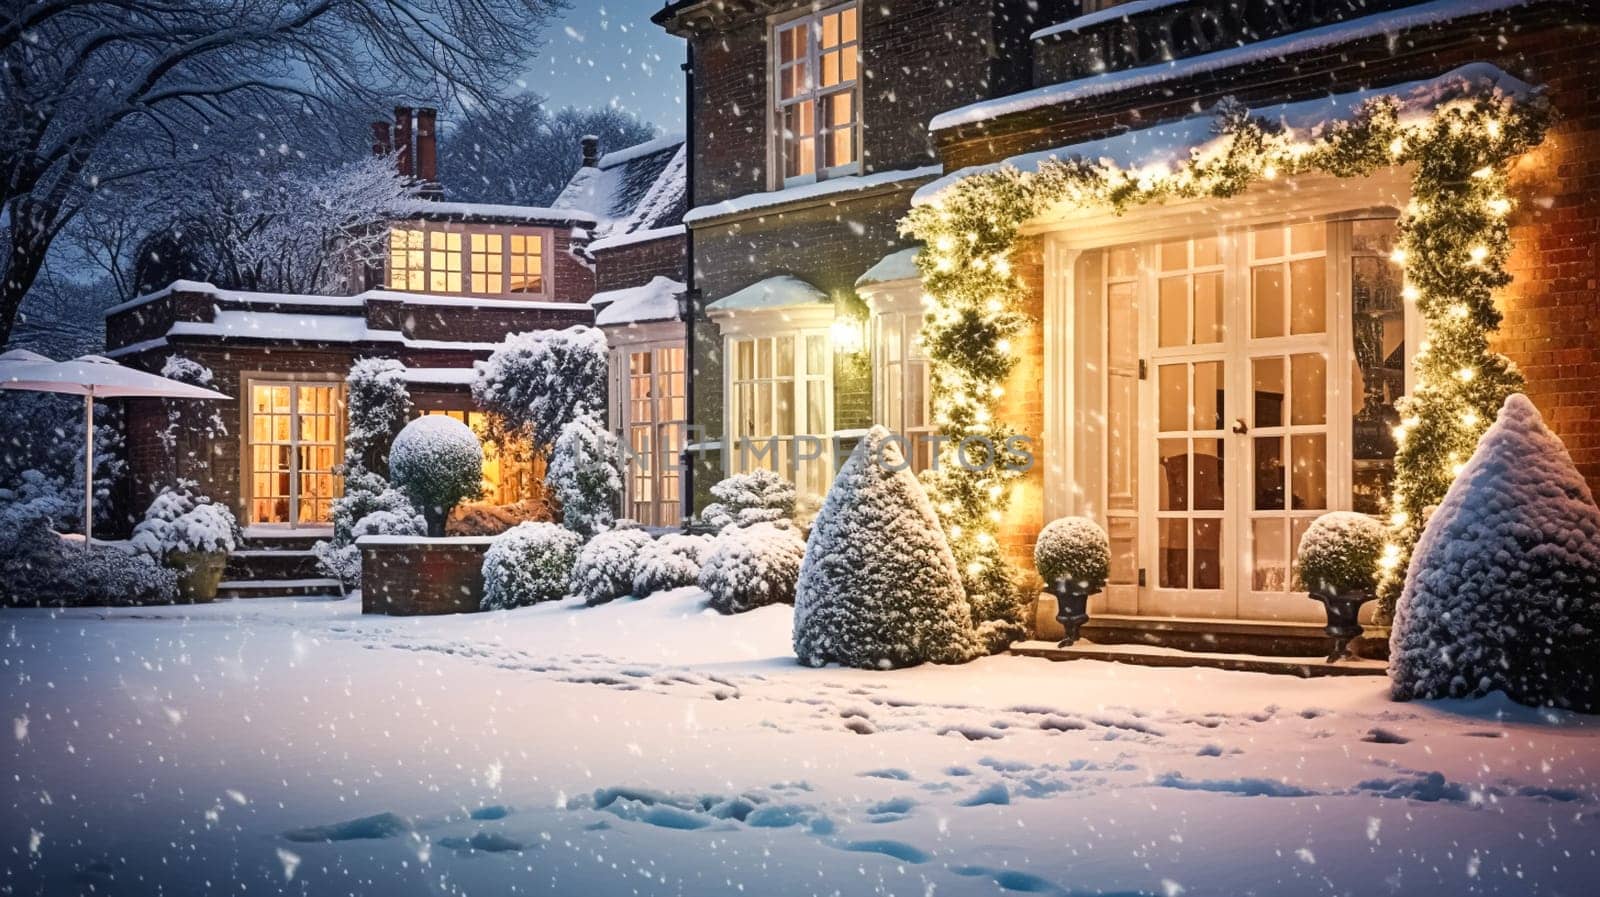 Christmas in the countryside manor, English country house mansion decorated for holidays on a snowy winter evening with snow and holiday lights, Merry Christmas and Happy Holidays by Anneleven